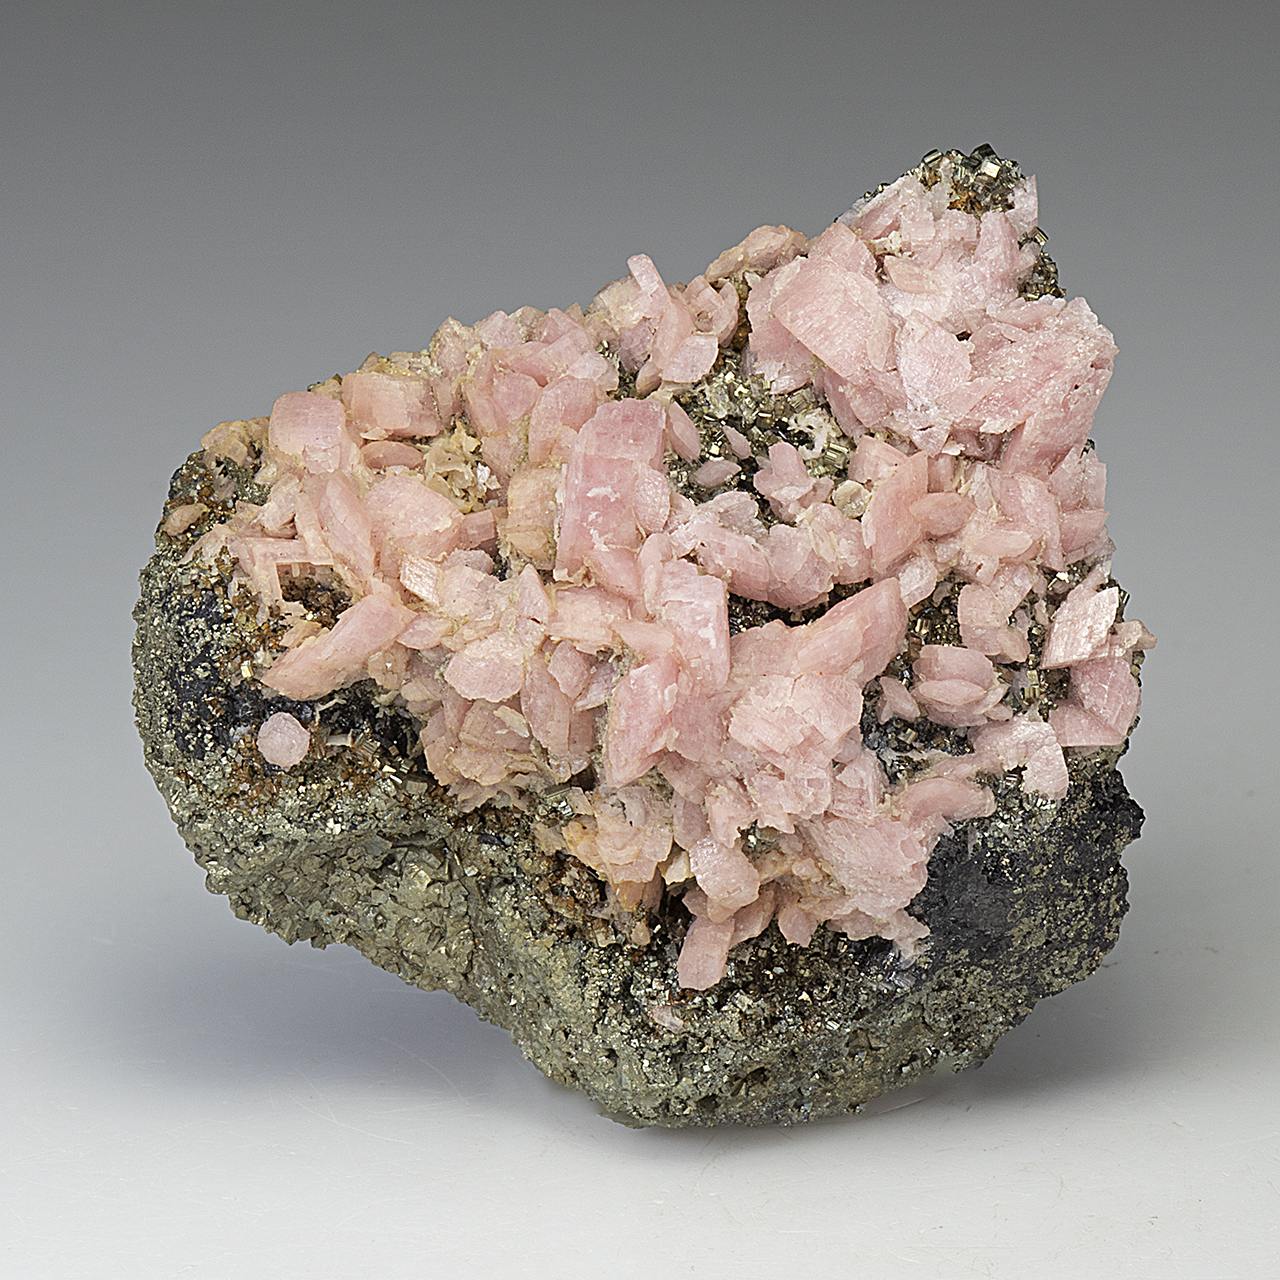 Pink Crystals Rhodochrosite with Particles of Pyrite. Natural Texture of  Mineral for Background Stock Image - Image of crystal, nugget: 131529665